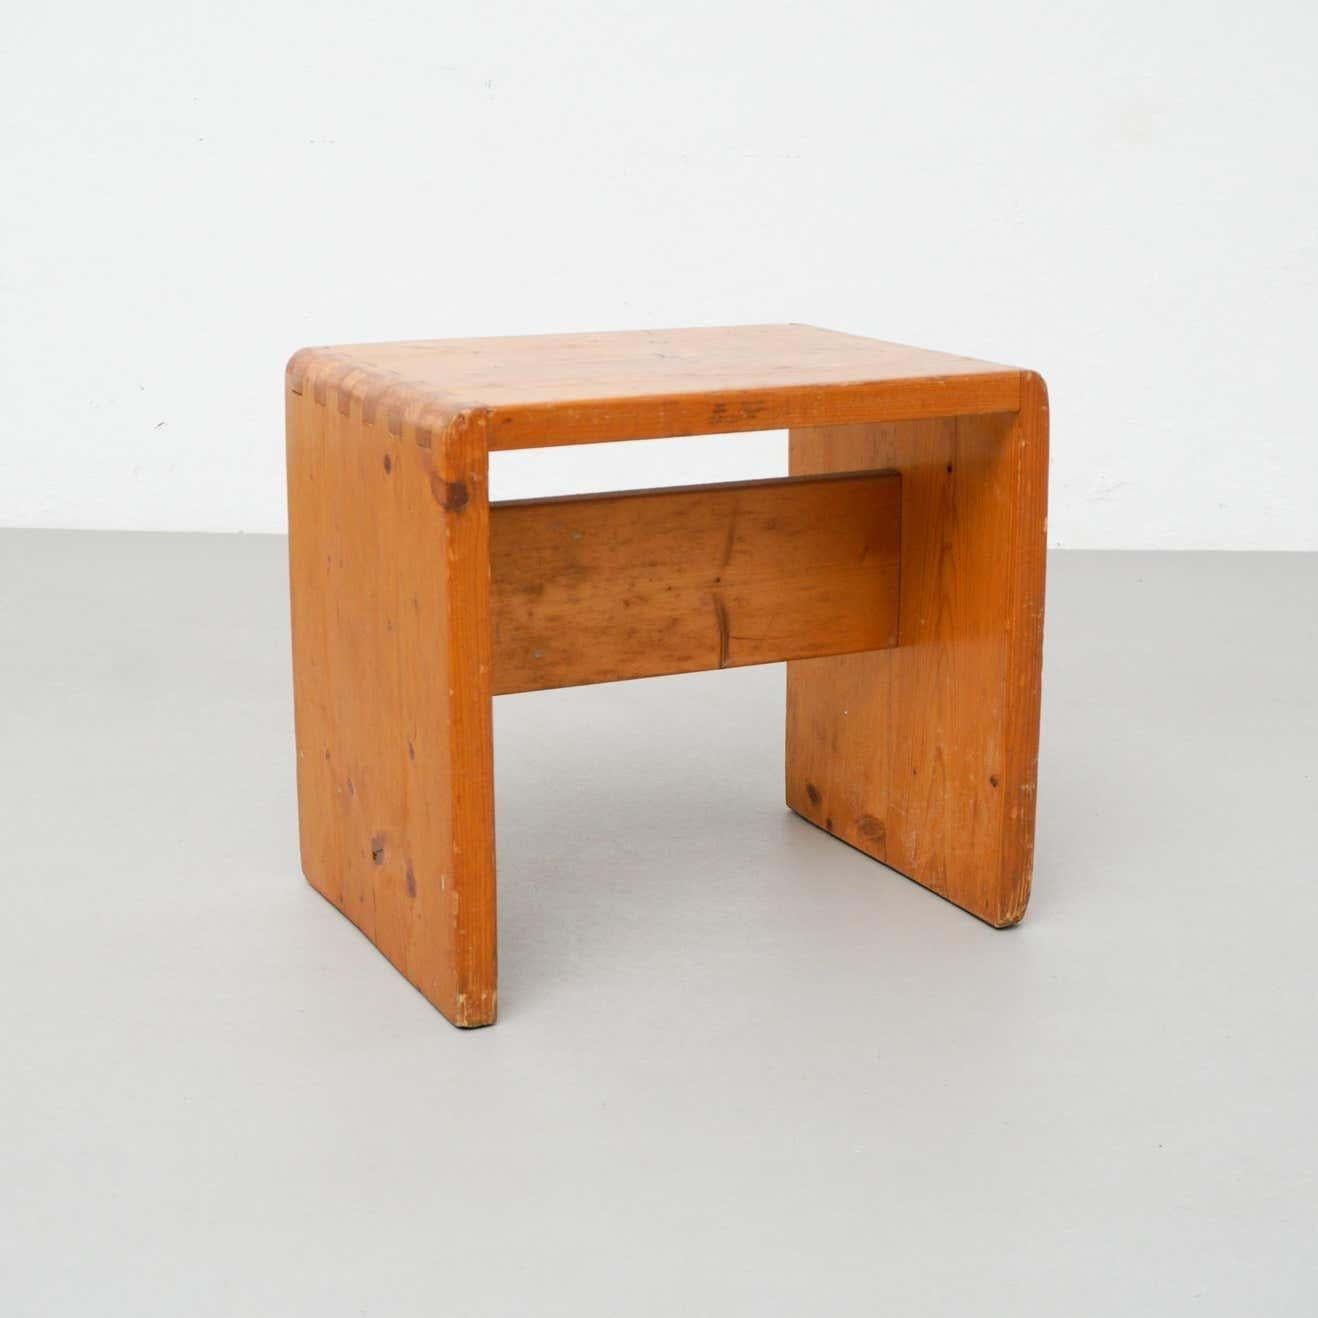 Charlotte Perriand Pine Wood Stool for Les Arcs In Good Condition For Sale In Barcelona, Barcelona